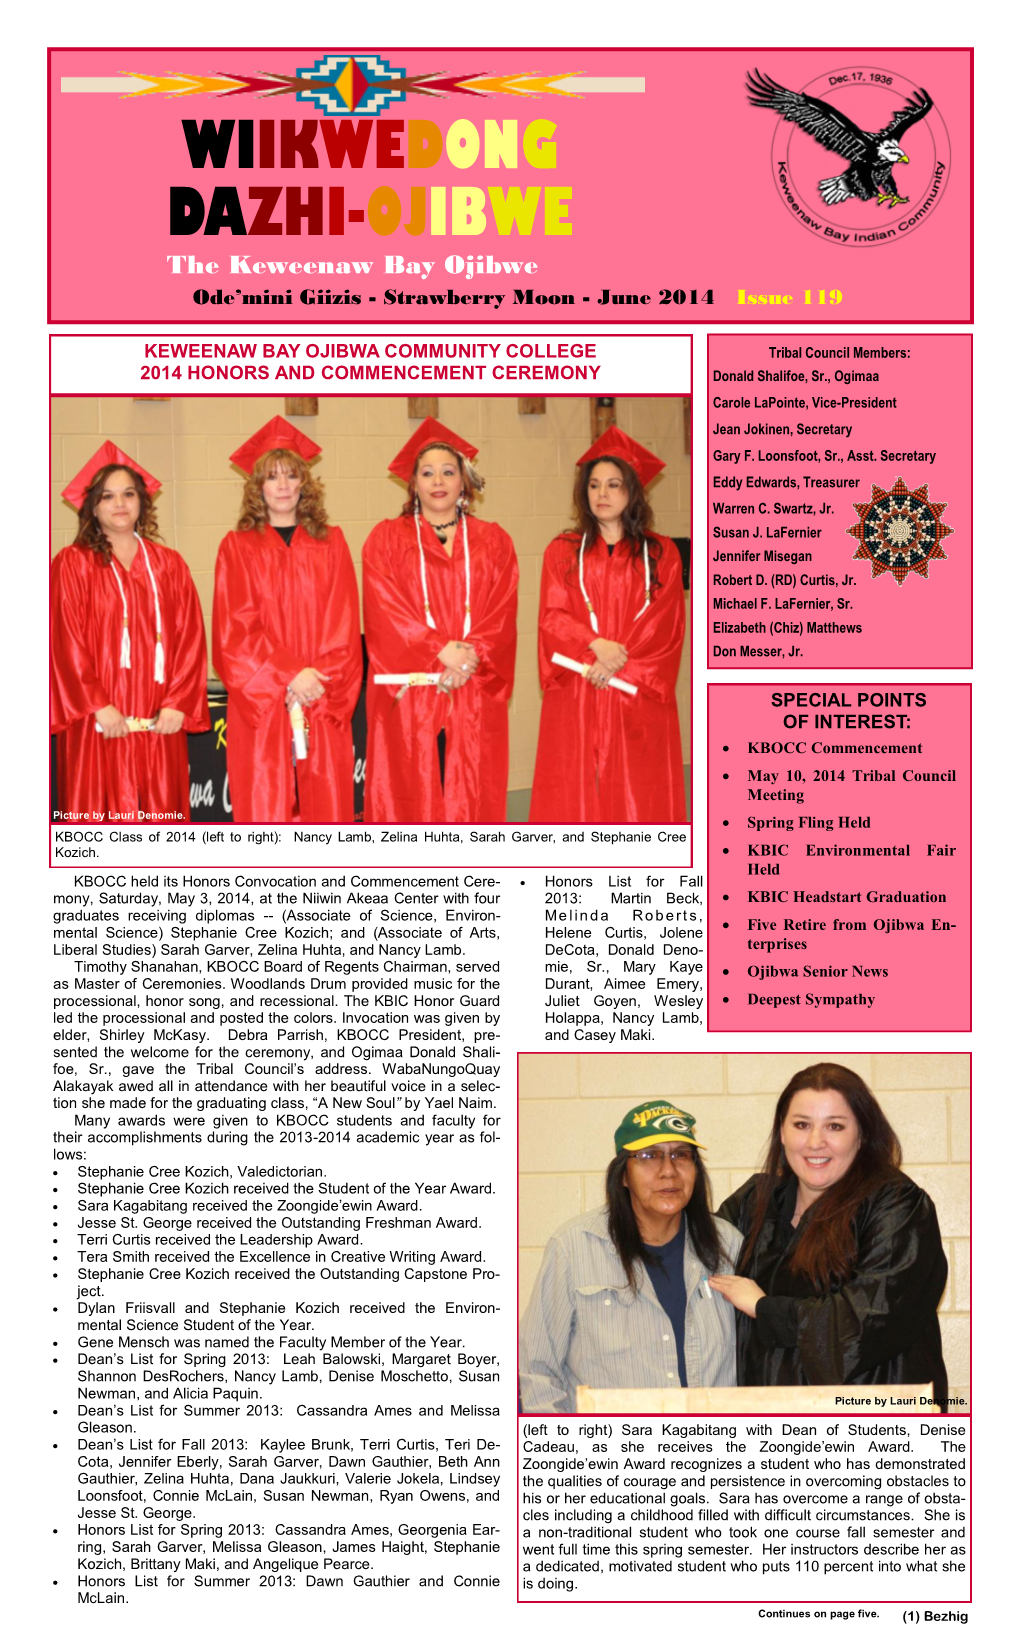 June 2014 Issue 119